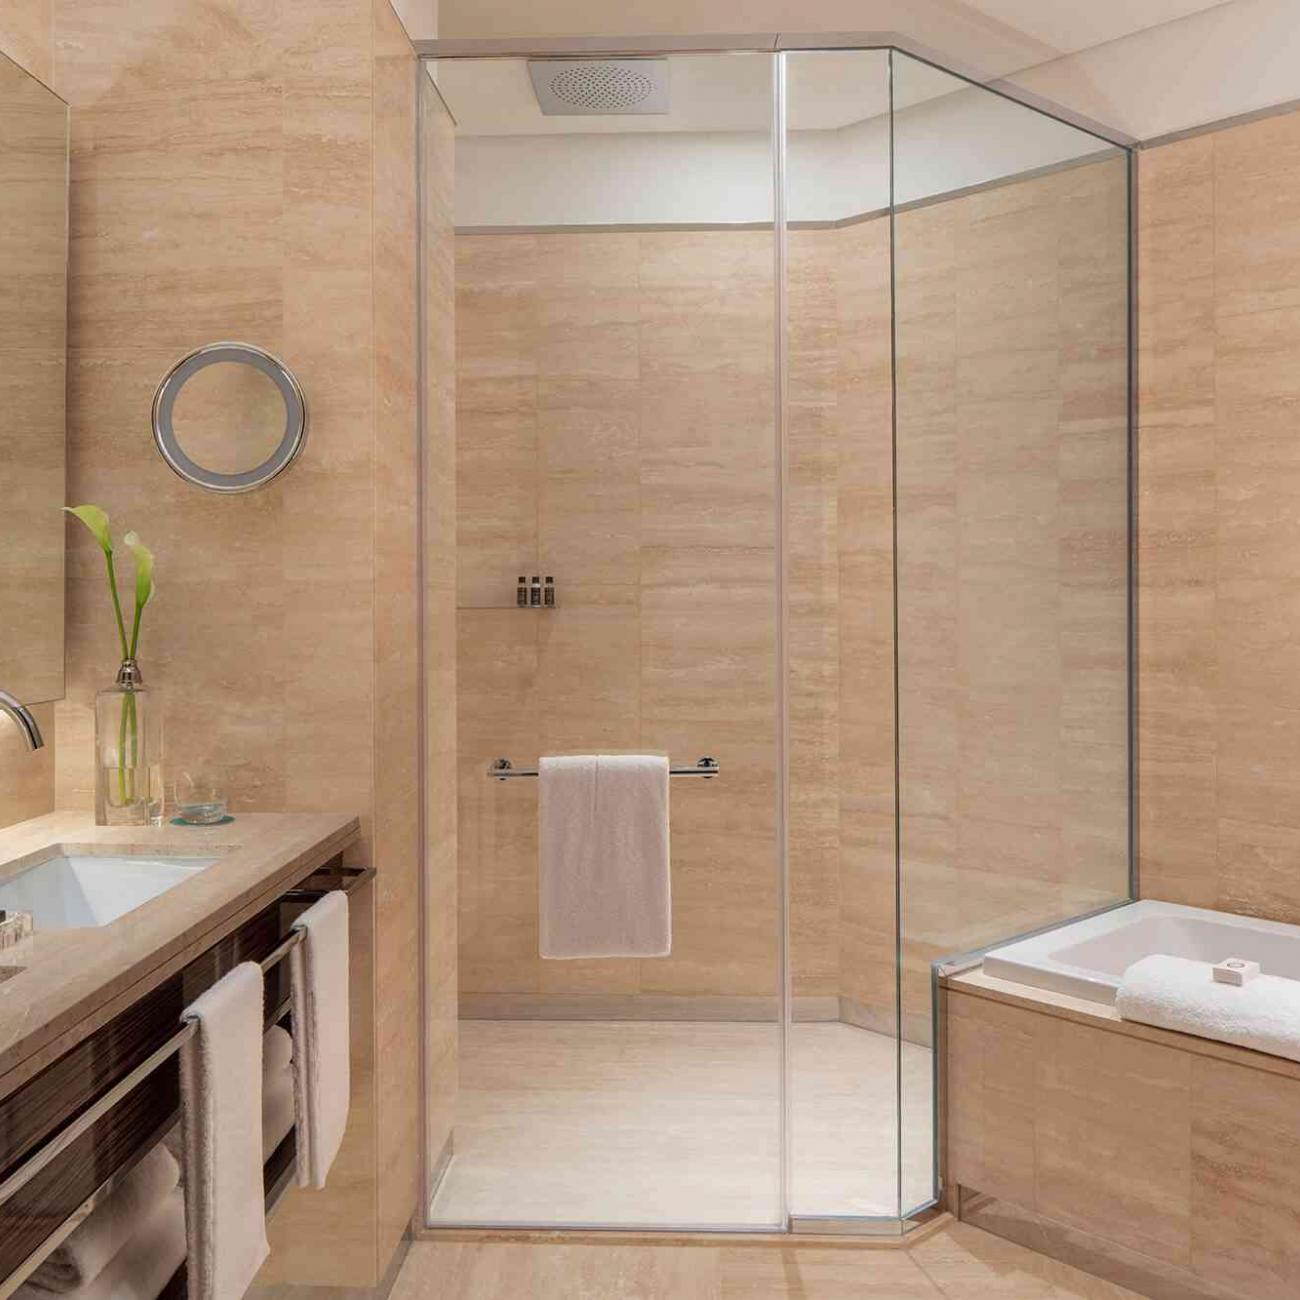 Large bathroom with 2 sinks on the left, walk in glassed shower at the centre, and a bathtub to the right.